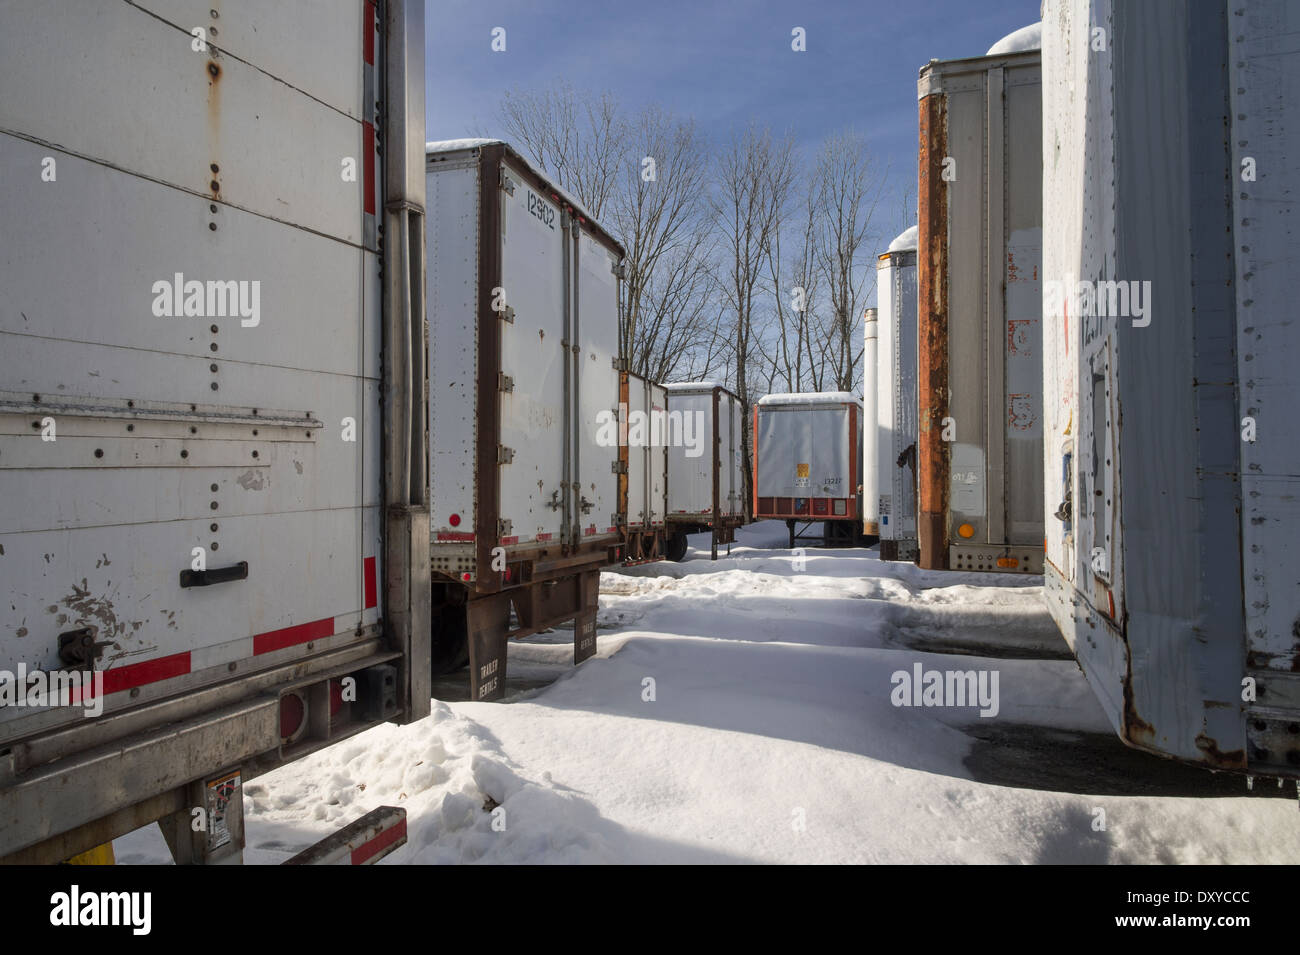 Tractor Trailers Parked In Snow Stock Photo